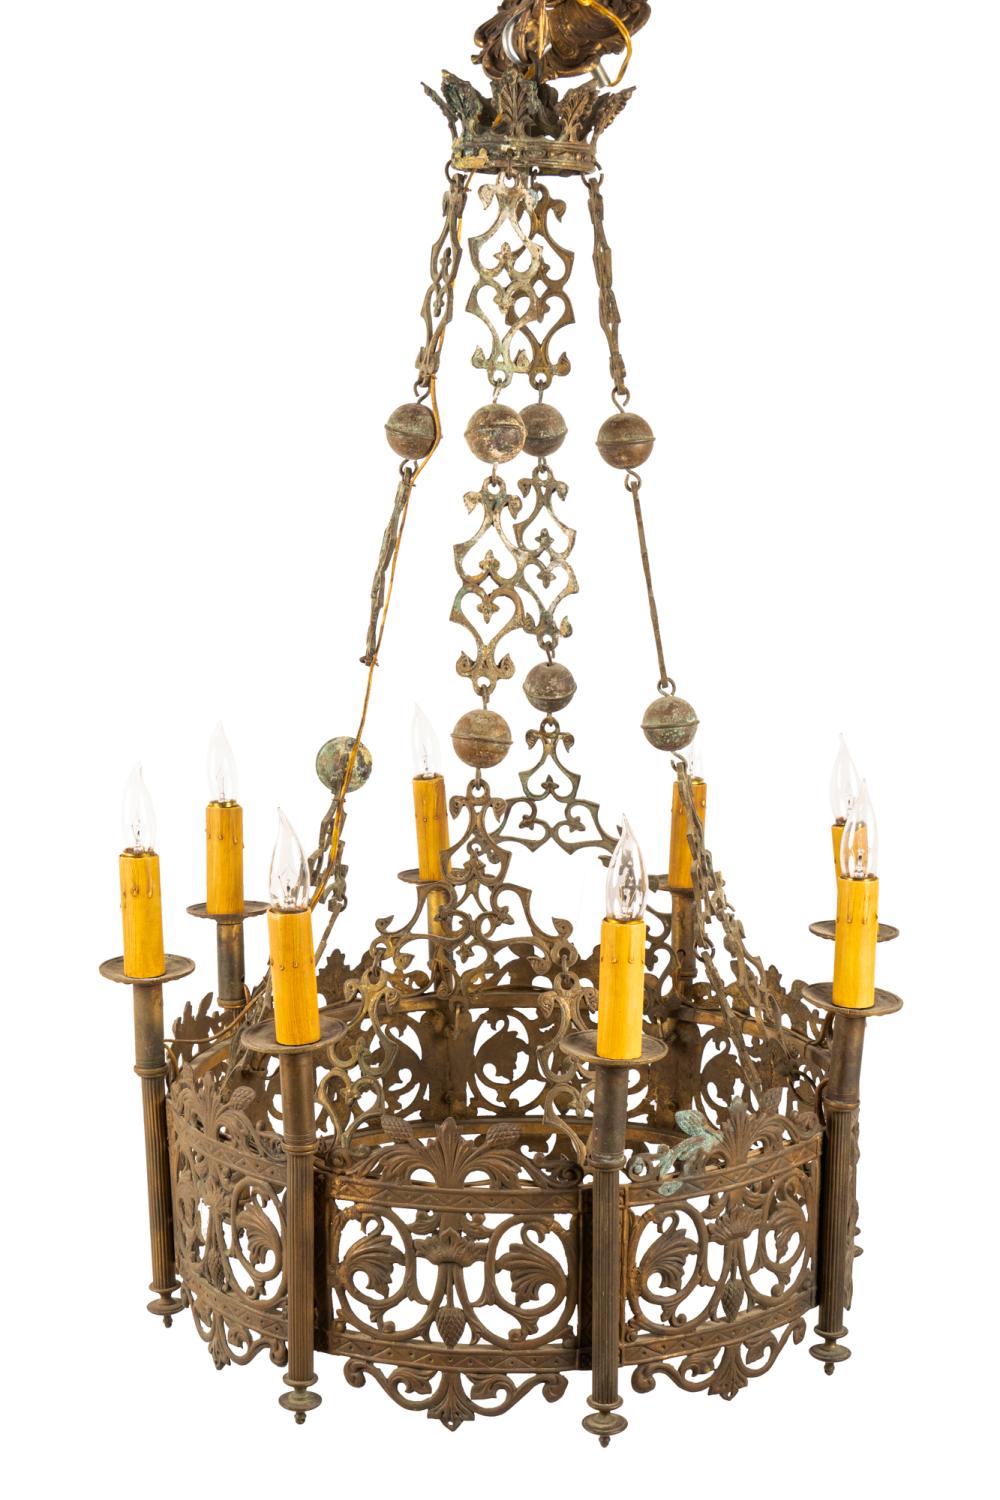 GOTHIC-STYLE EIGHT-LIGHT CHANDELIERwith